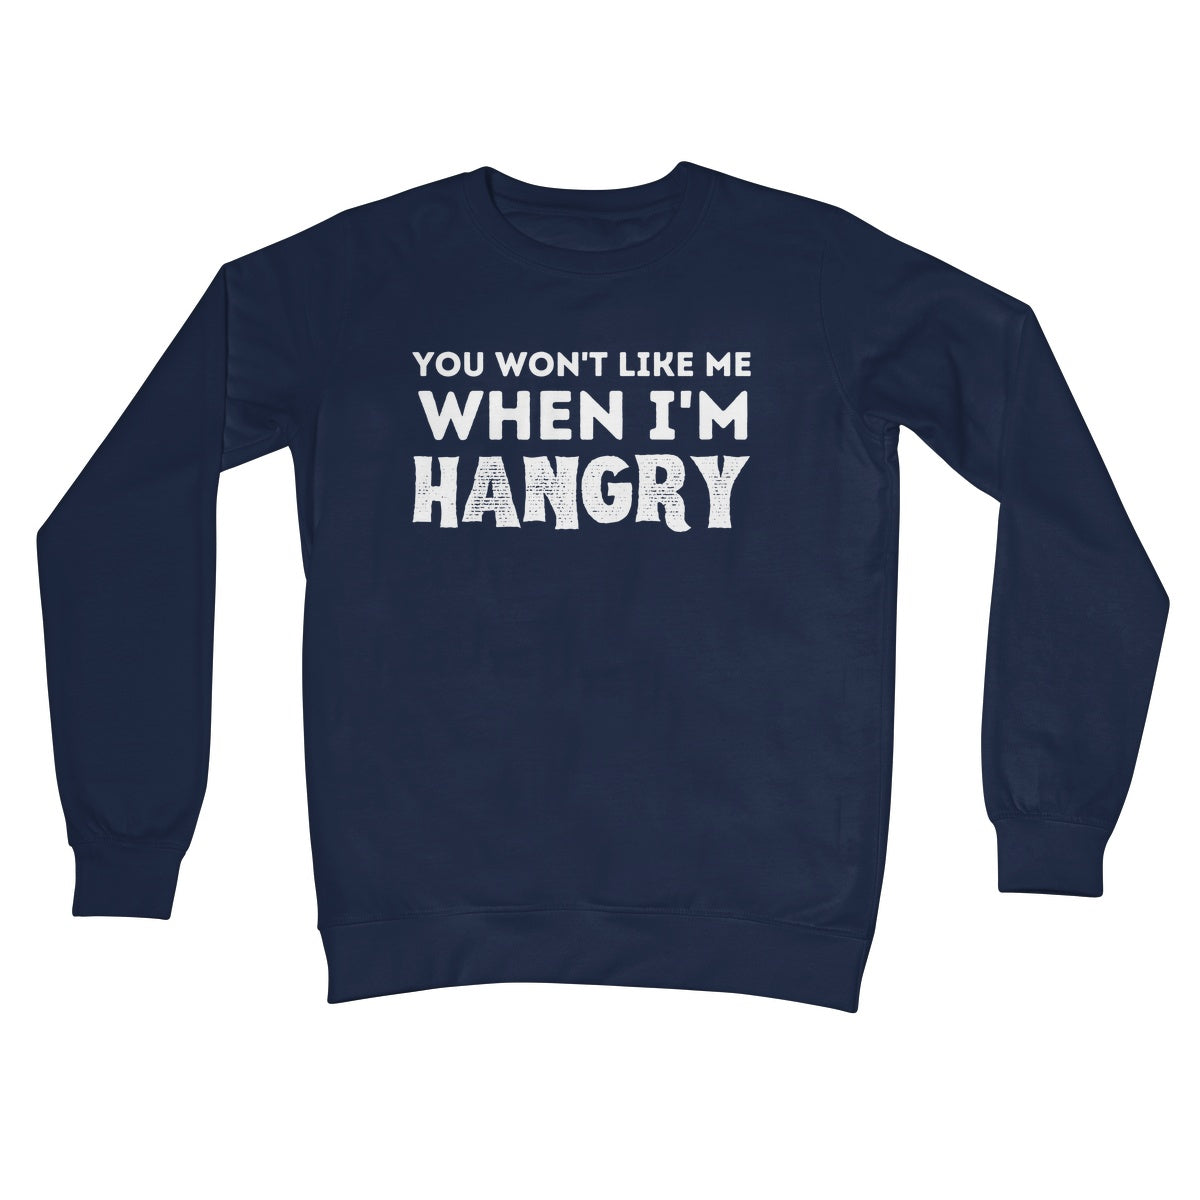 you won't like me when I'm hangry jumper navy